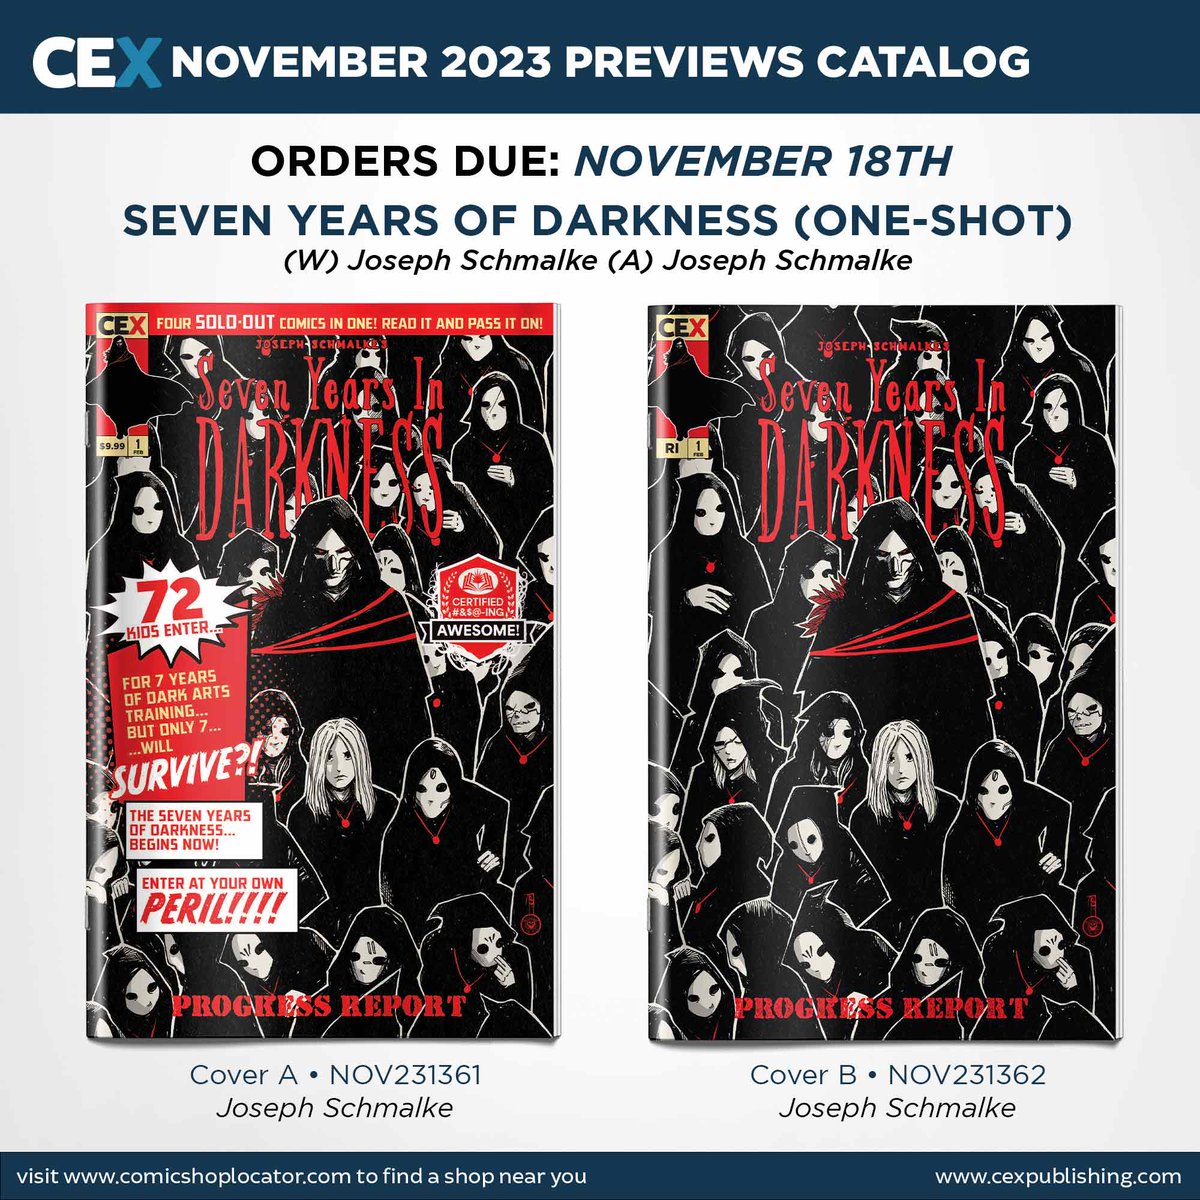 The countdown begins. CEX’s acclaimed fantasy series Seven Years in Darkness returns for a killer second season in 2024. With little time left before the next chapter unfolds, revisit the dark world of sorcery and survival from @josephschmalke #comics @PREVIEWSworld #NOV23